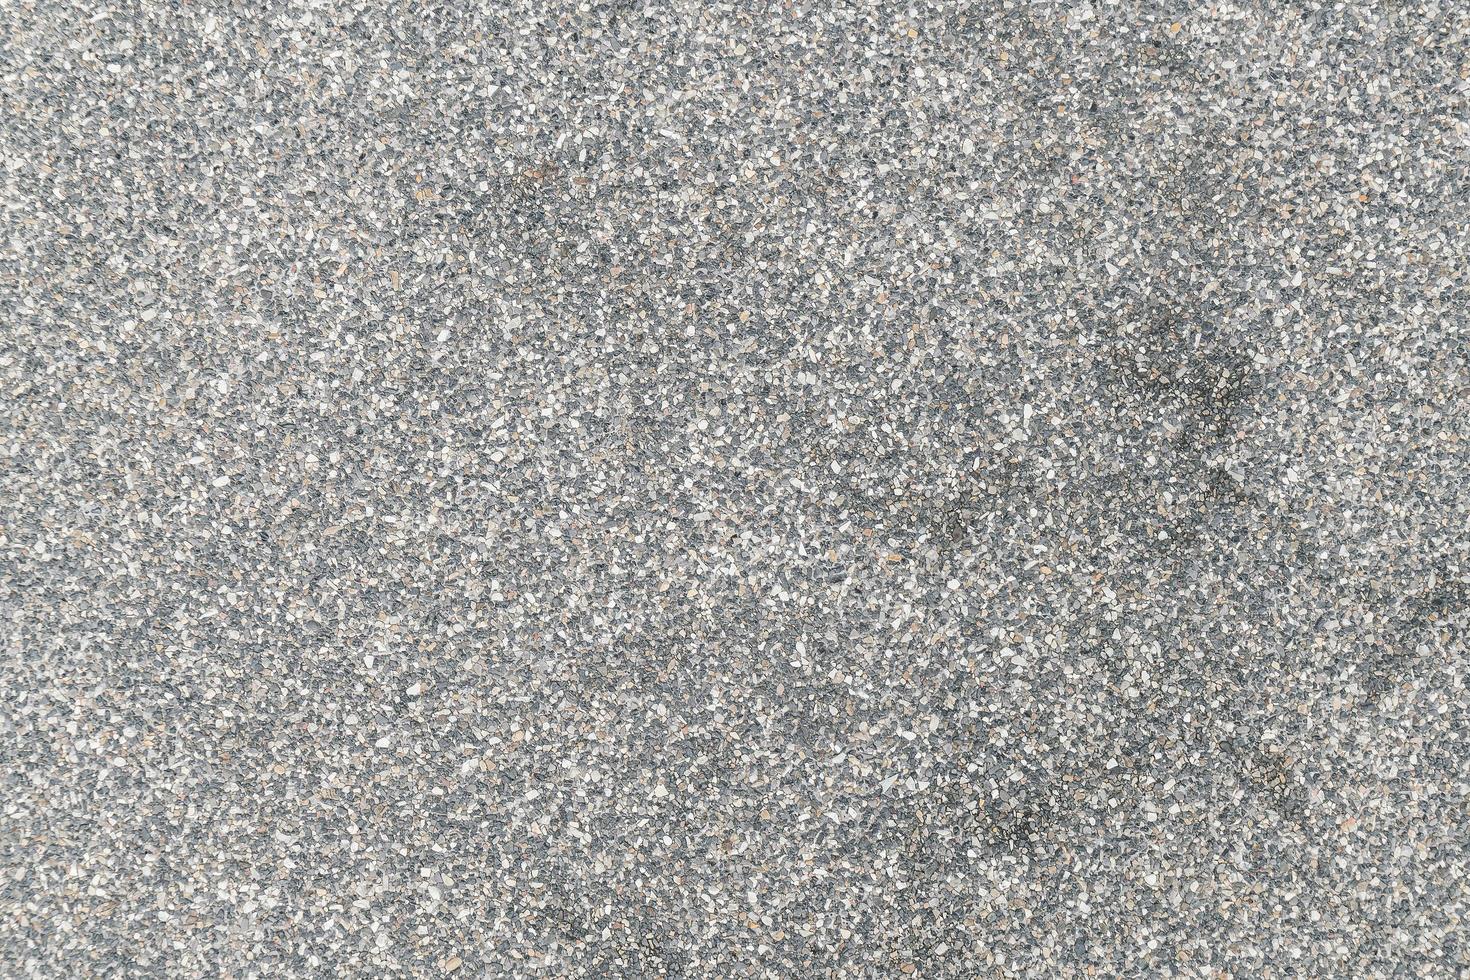 Ground rock texture for background photo